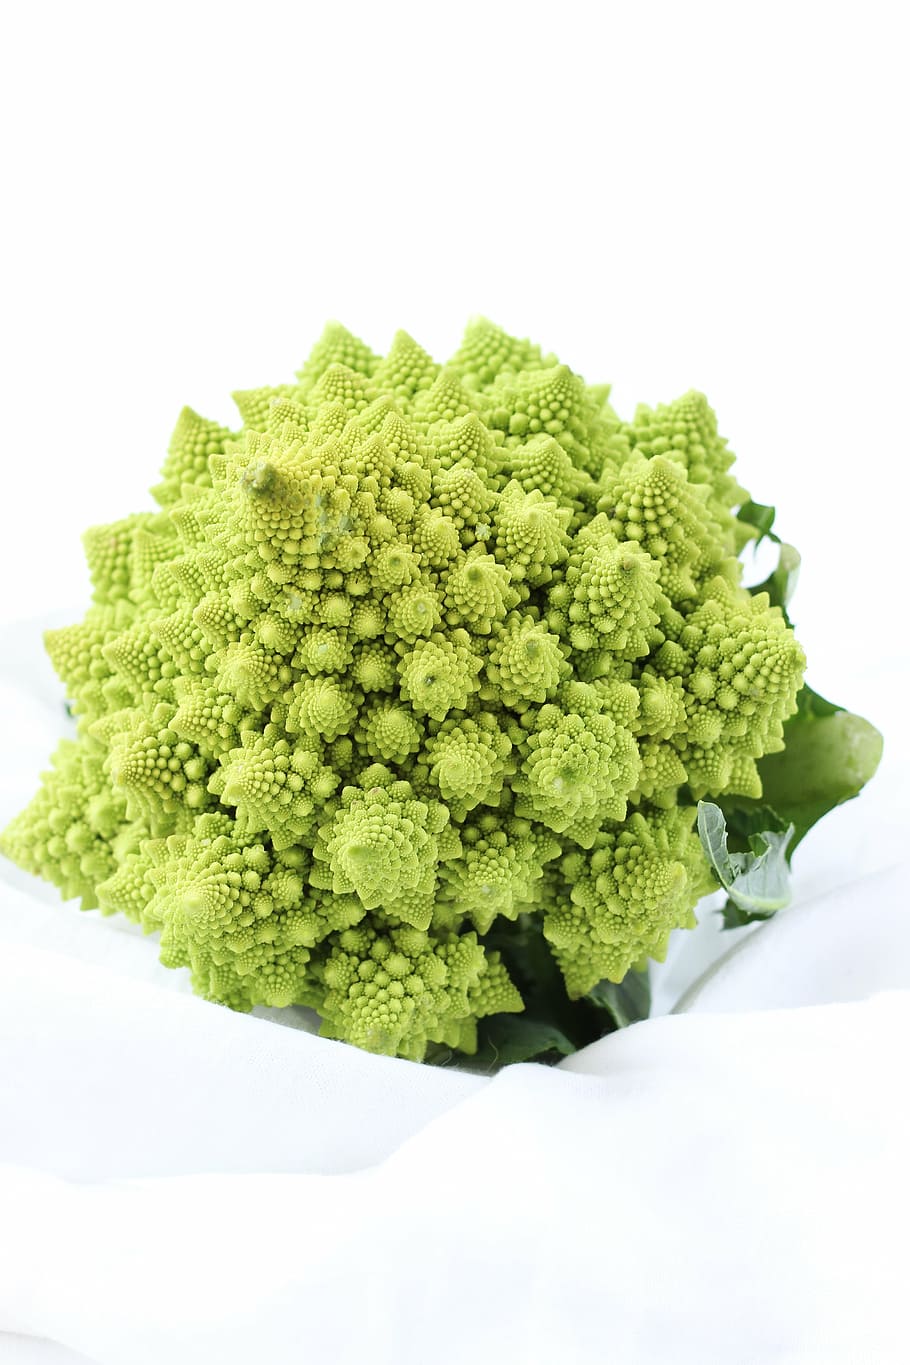 romanesco broccoli, white, surface, plant, green, leaves, flower, garden, green color, food and drink